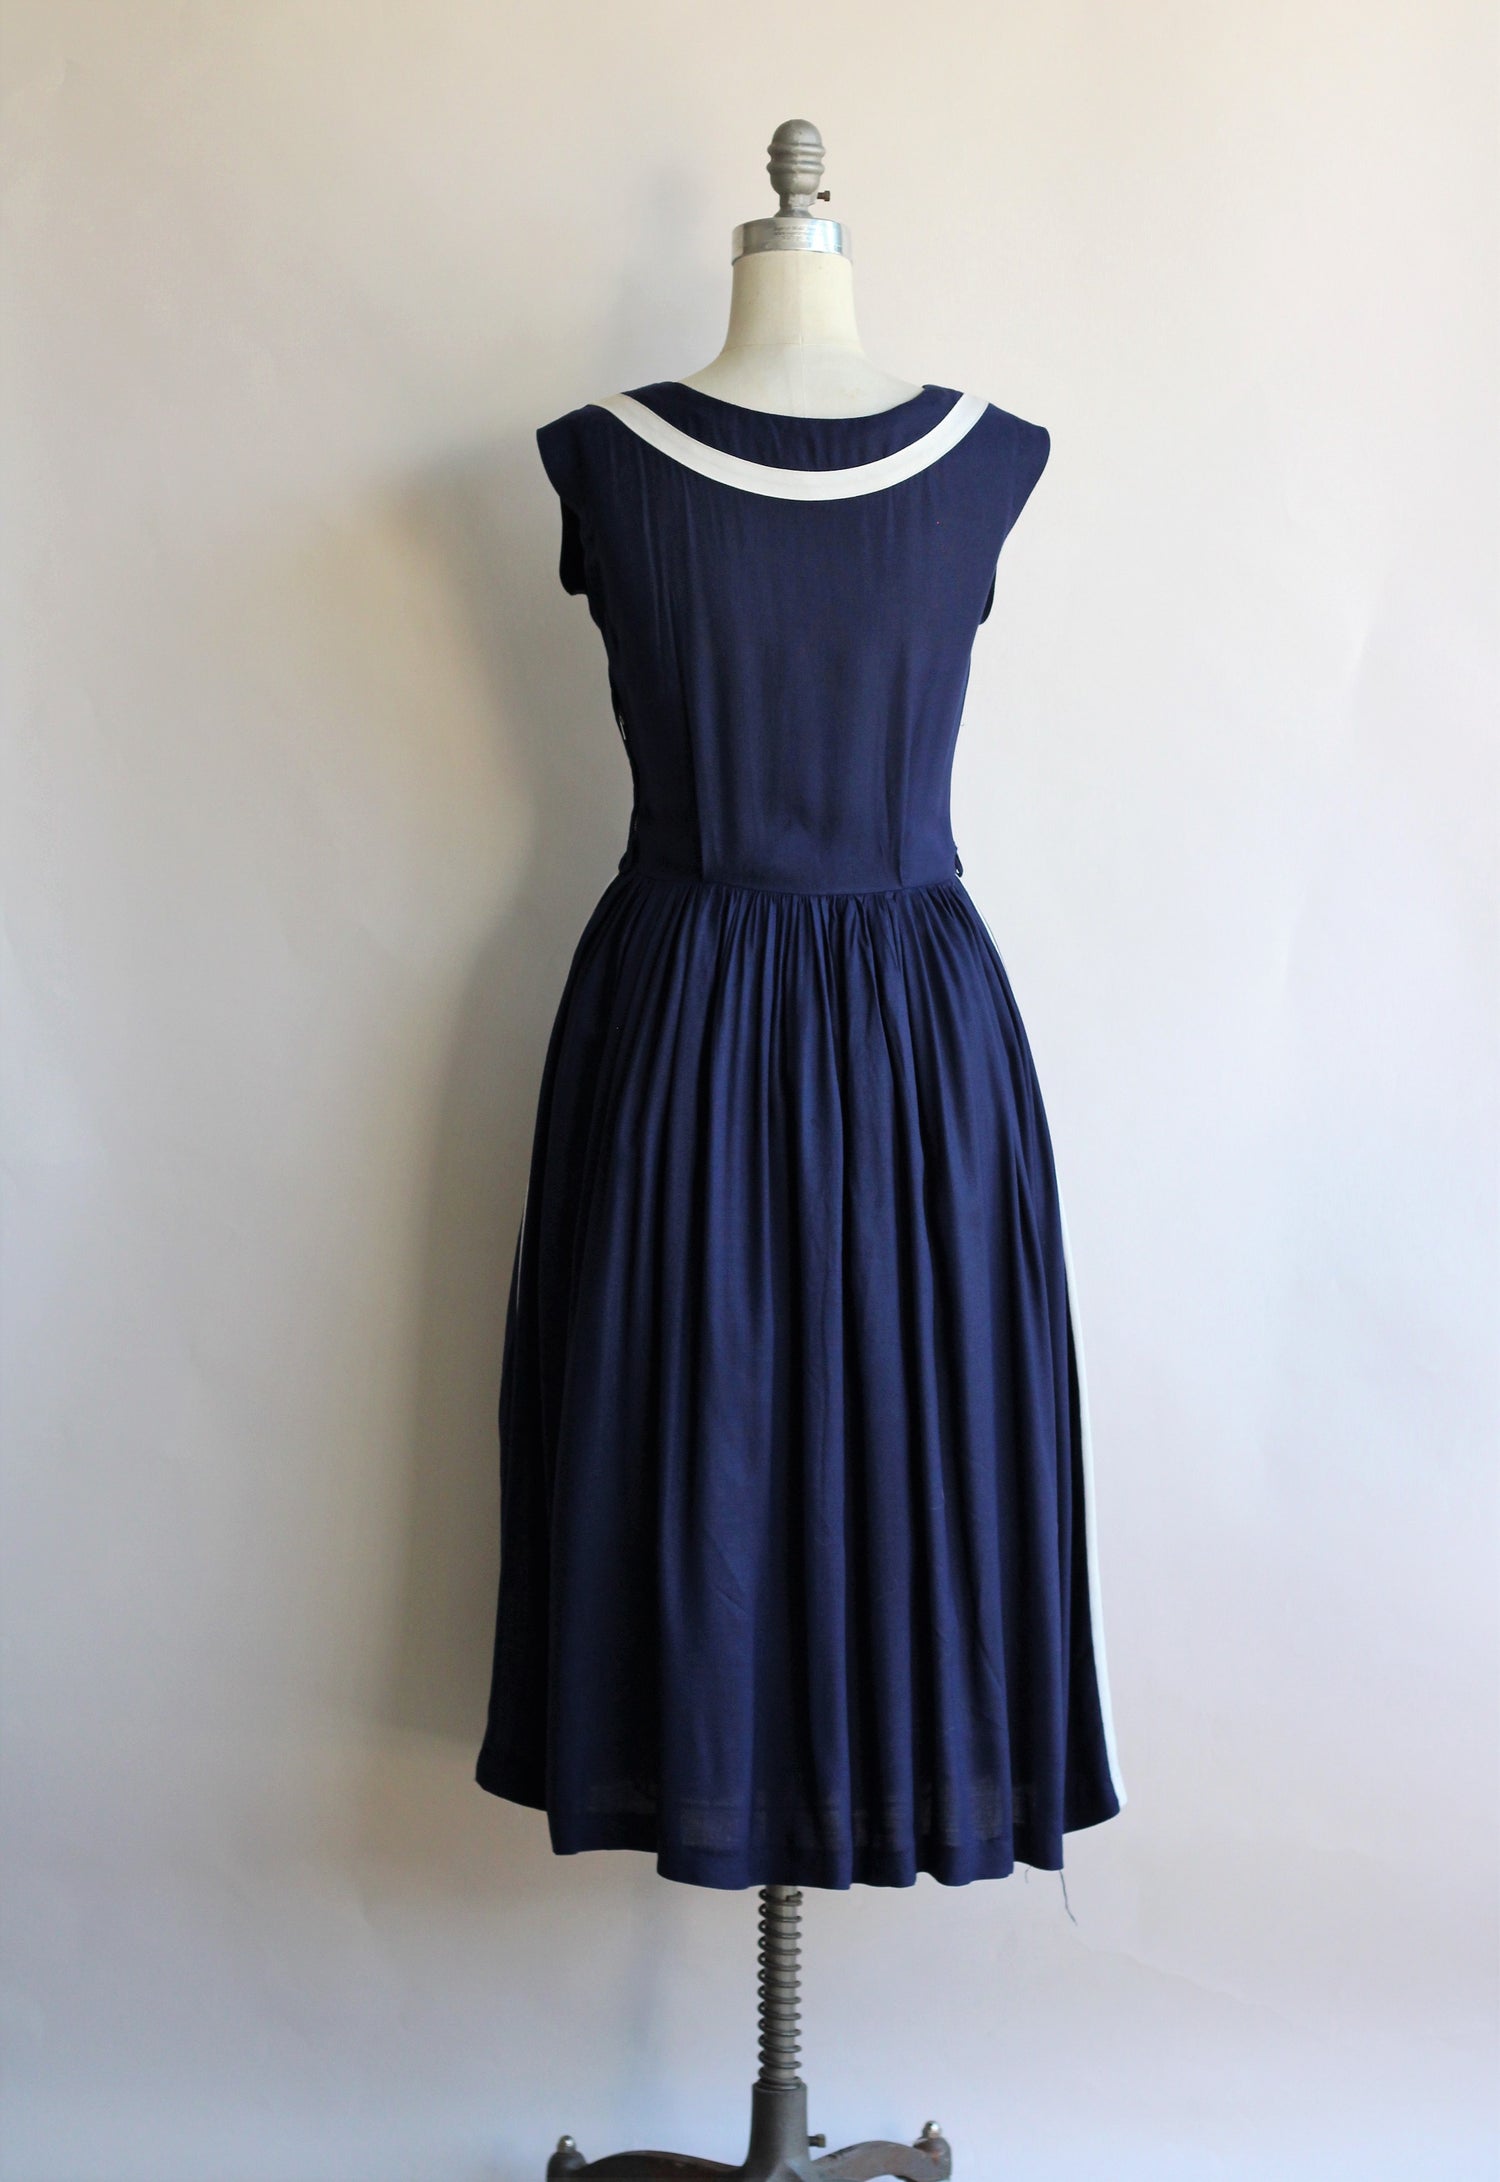 1950s Navy Blue Dress with White Appliques and Stripe